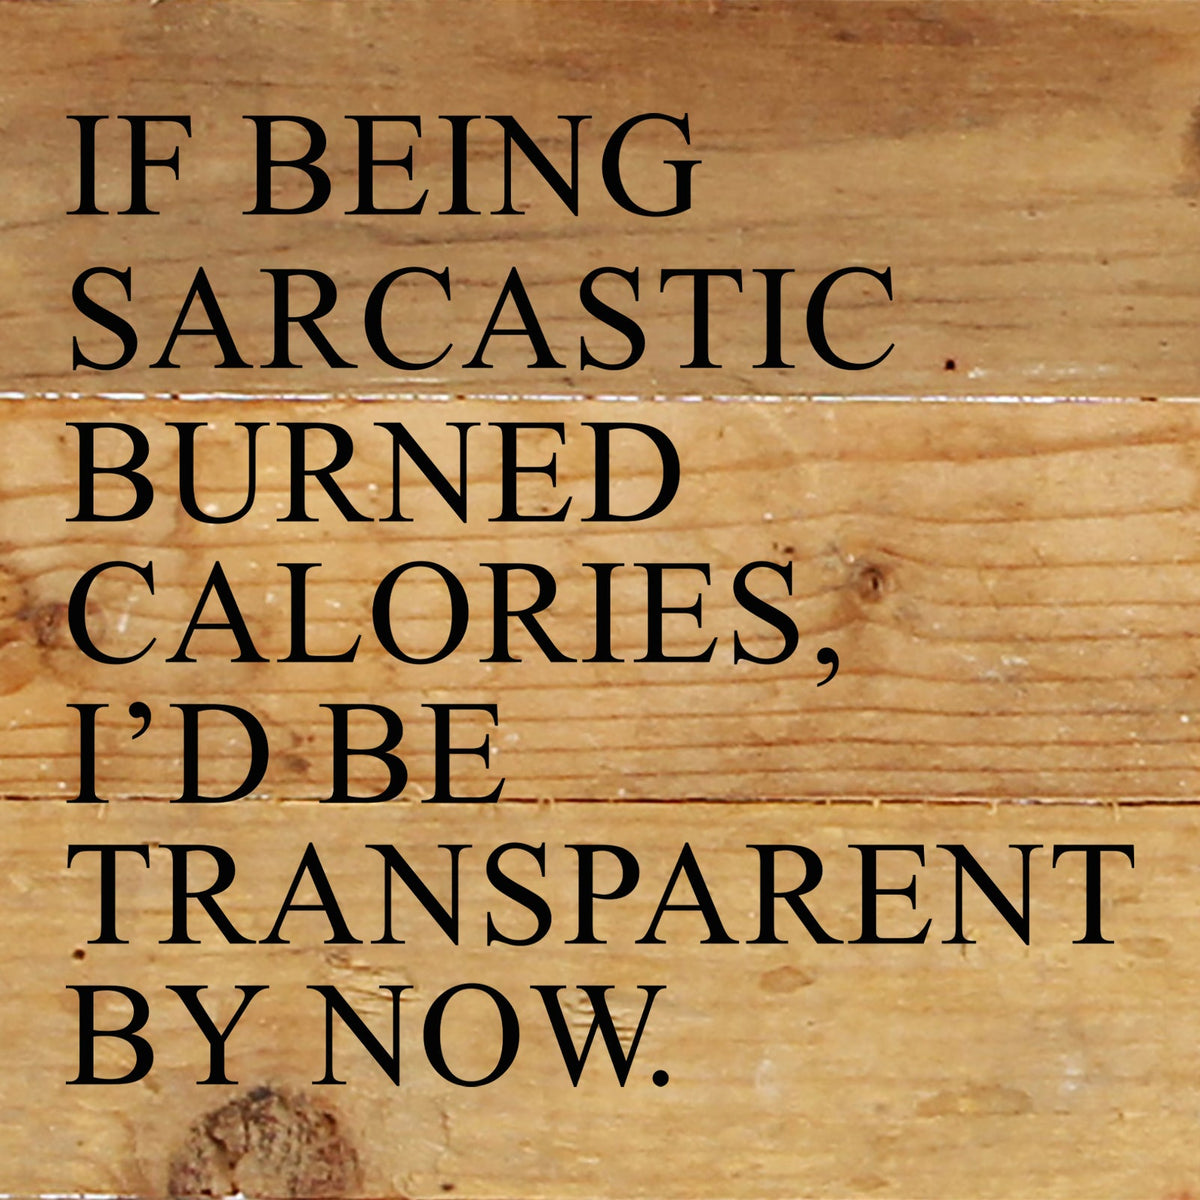 If being sarcastic burned calories, I'd be transparent by now. / 6"x6" Reclaimed Wood Sign